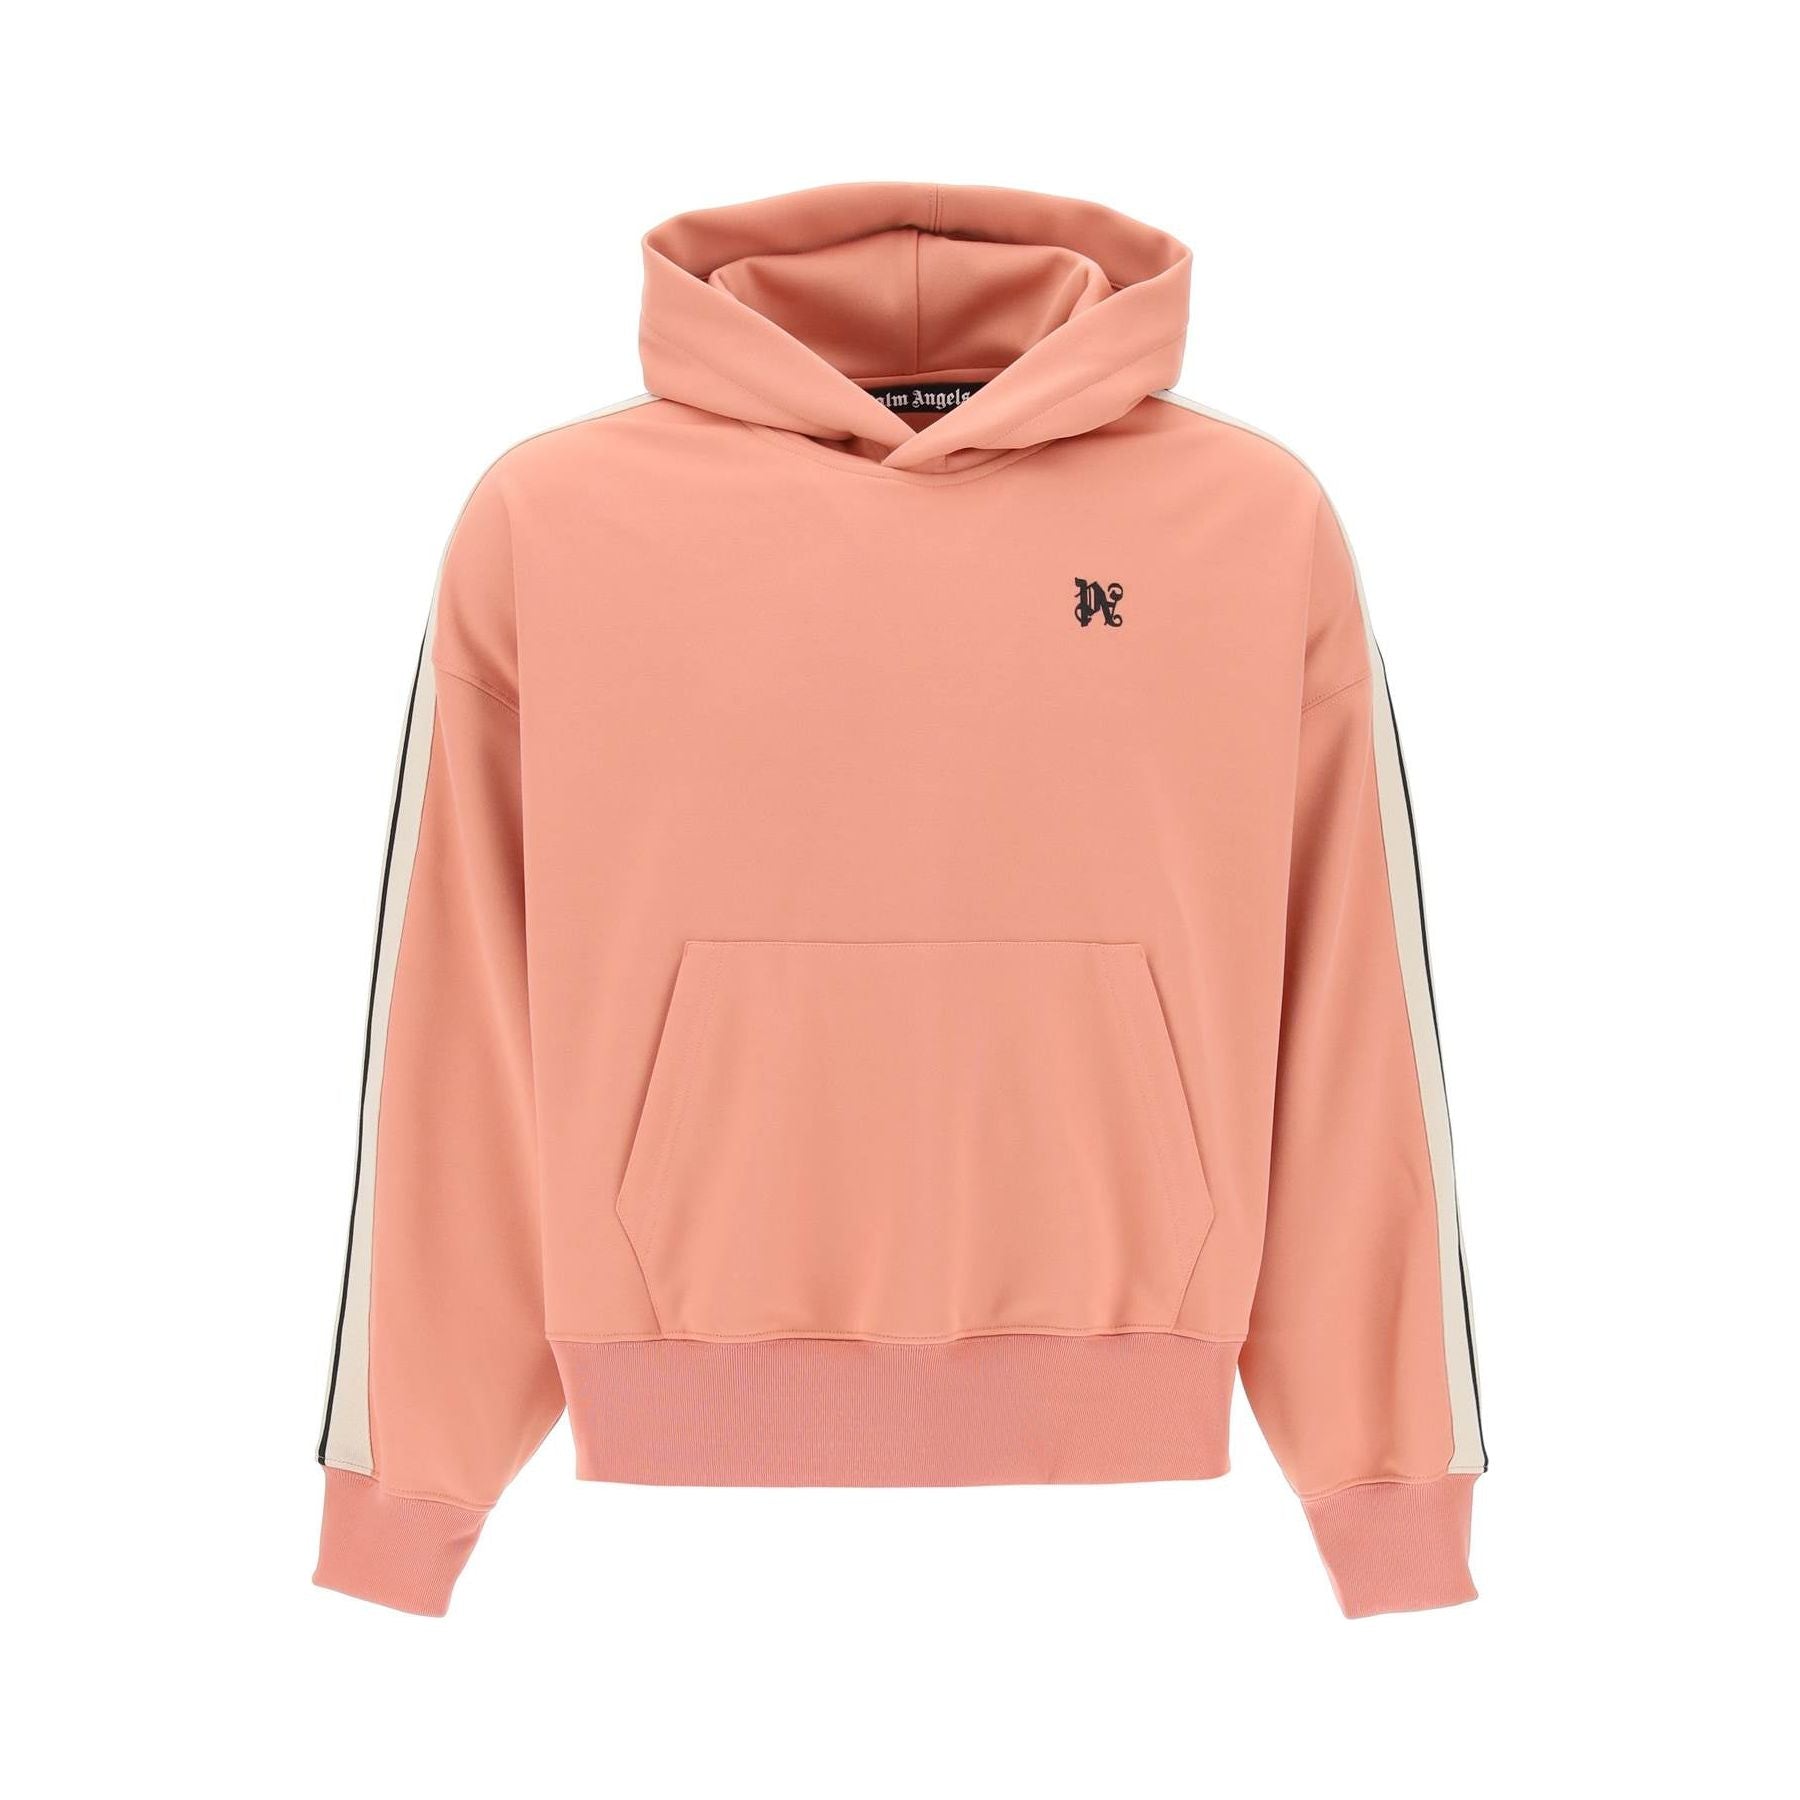 "Track Sweatshirt With Contrasting Bands